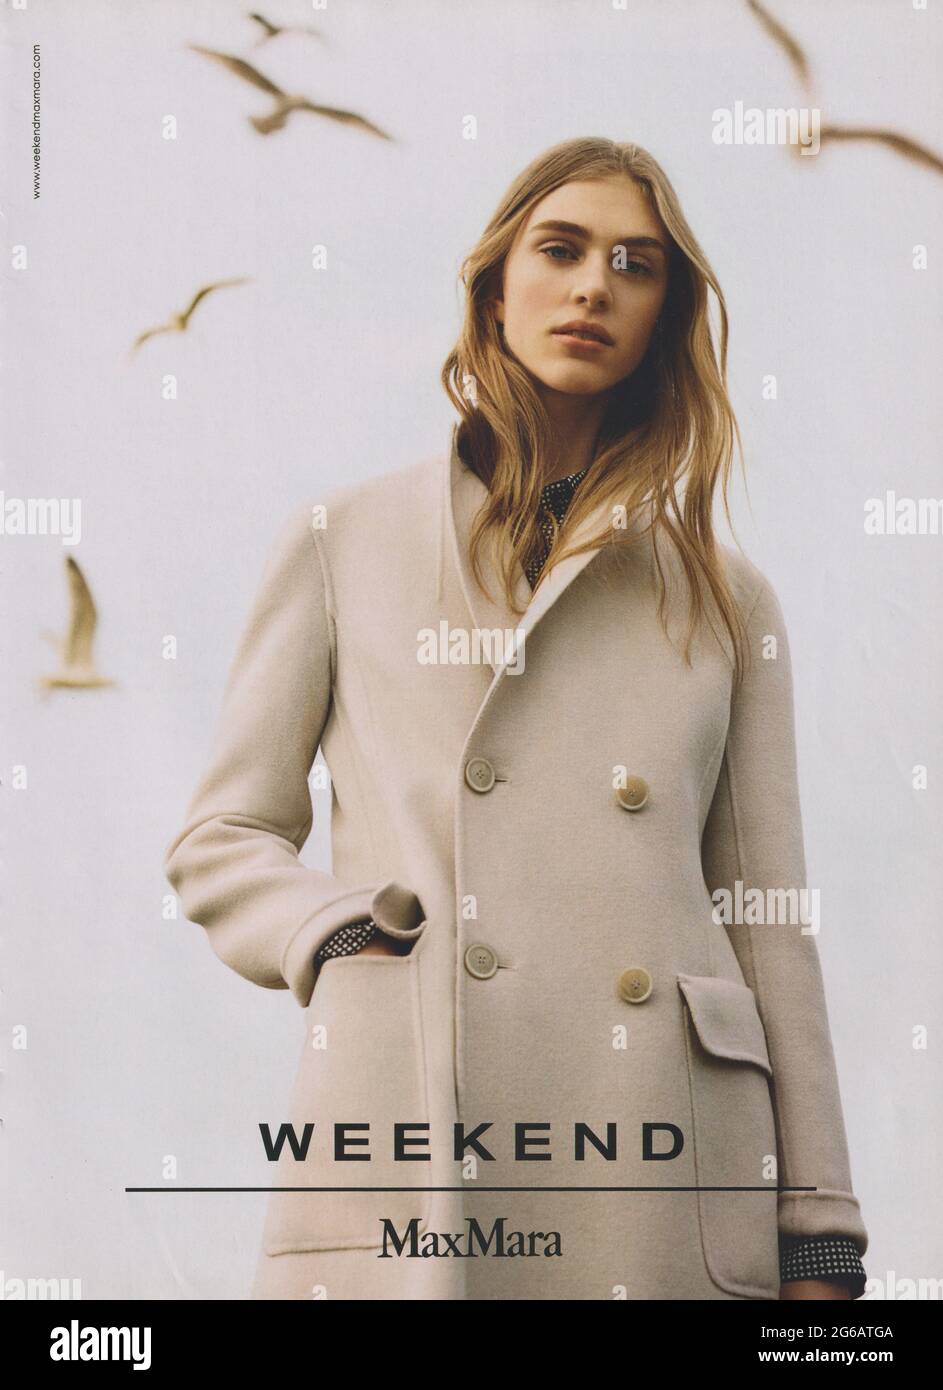 poster advertising Max Mara in paper magazine from 2015, advertisement, creative MaxMara advert from 2010s Stock Photo